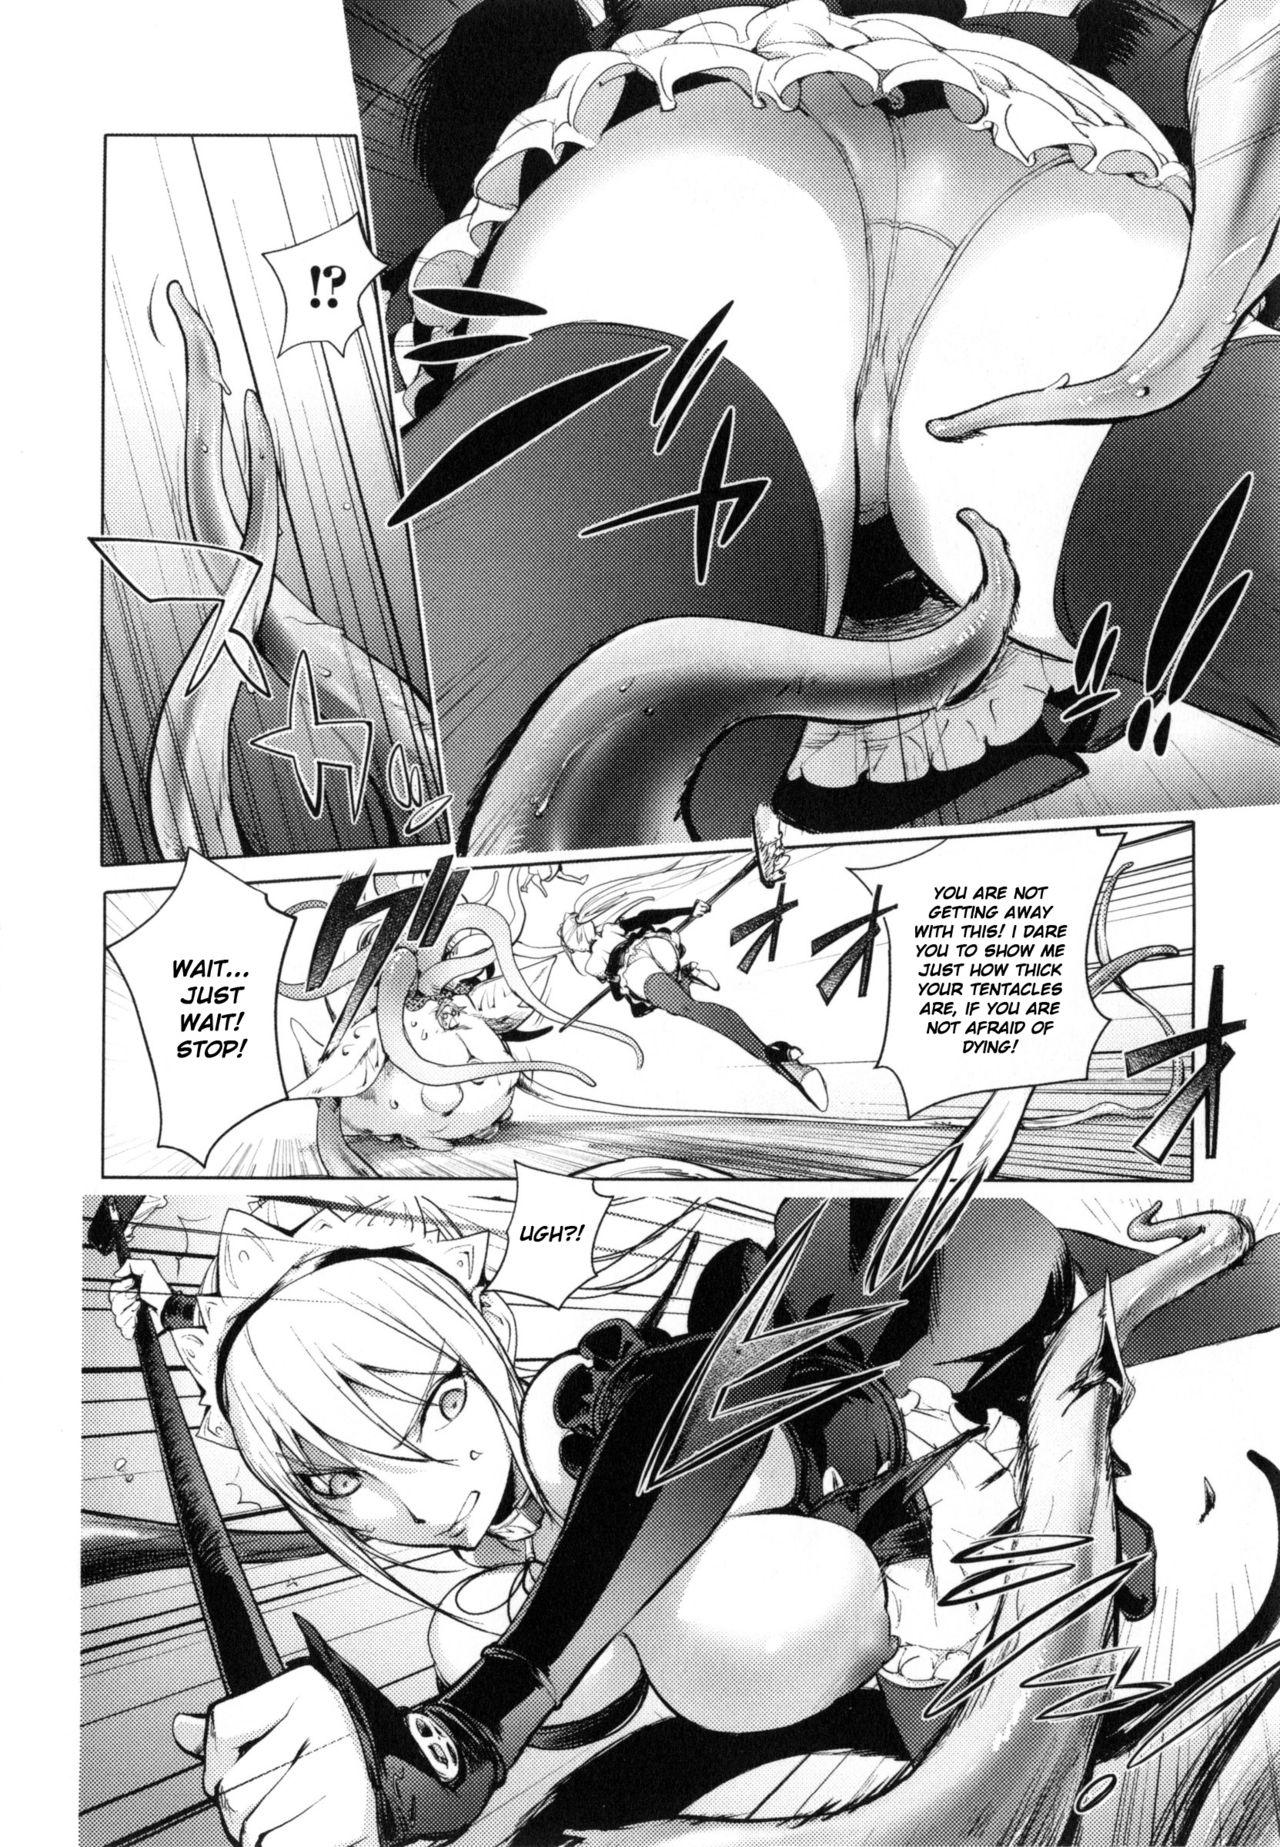 Fuck Pussy Shokushu Ouji | The Adventures Of The Three Heroes: Chapter 5 - The Tentacle Prince Hotwife - Page 8